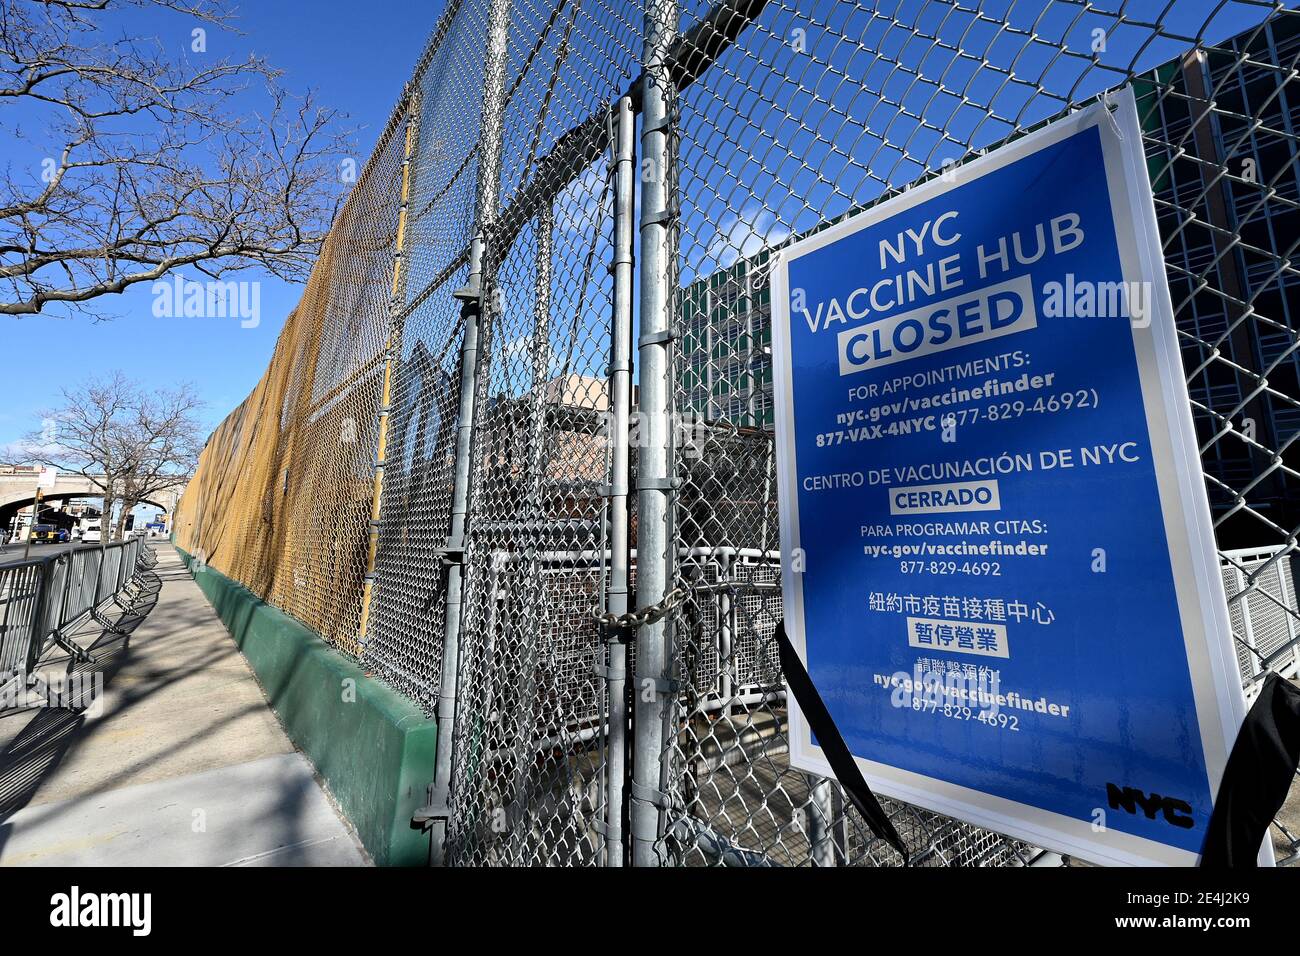 The COVID-19 Vaccine Hub at the Aviation High School in Queens, is shut  down due to a shortage of vaccine supply in New York, NY, January 23, 2021.  New York City has